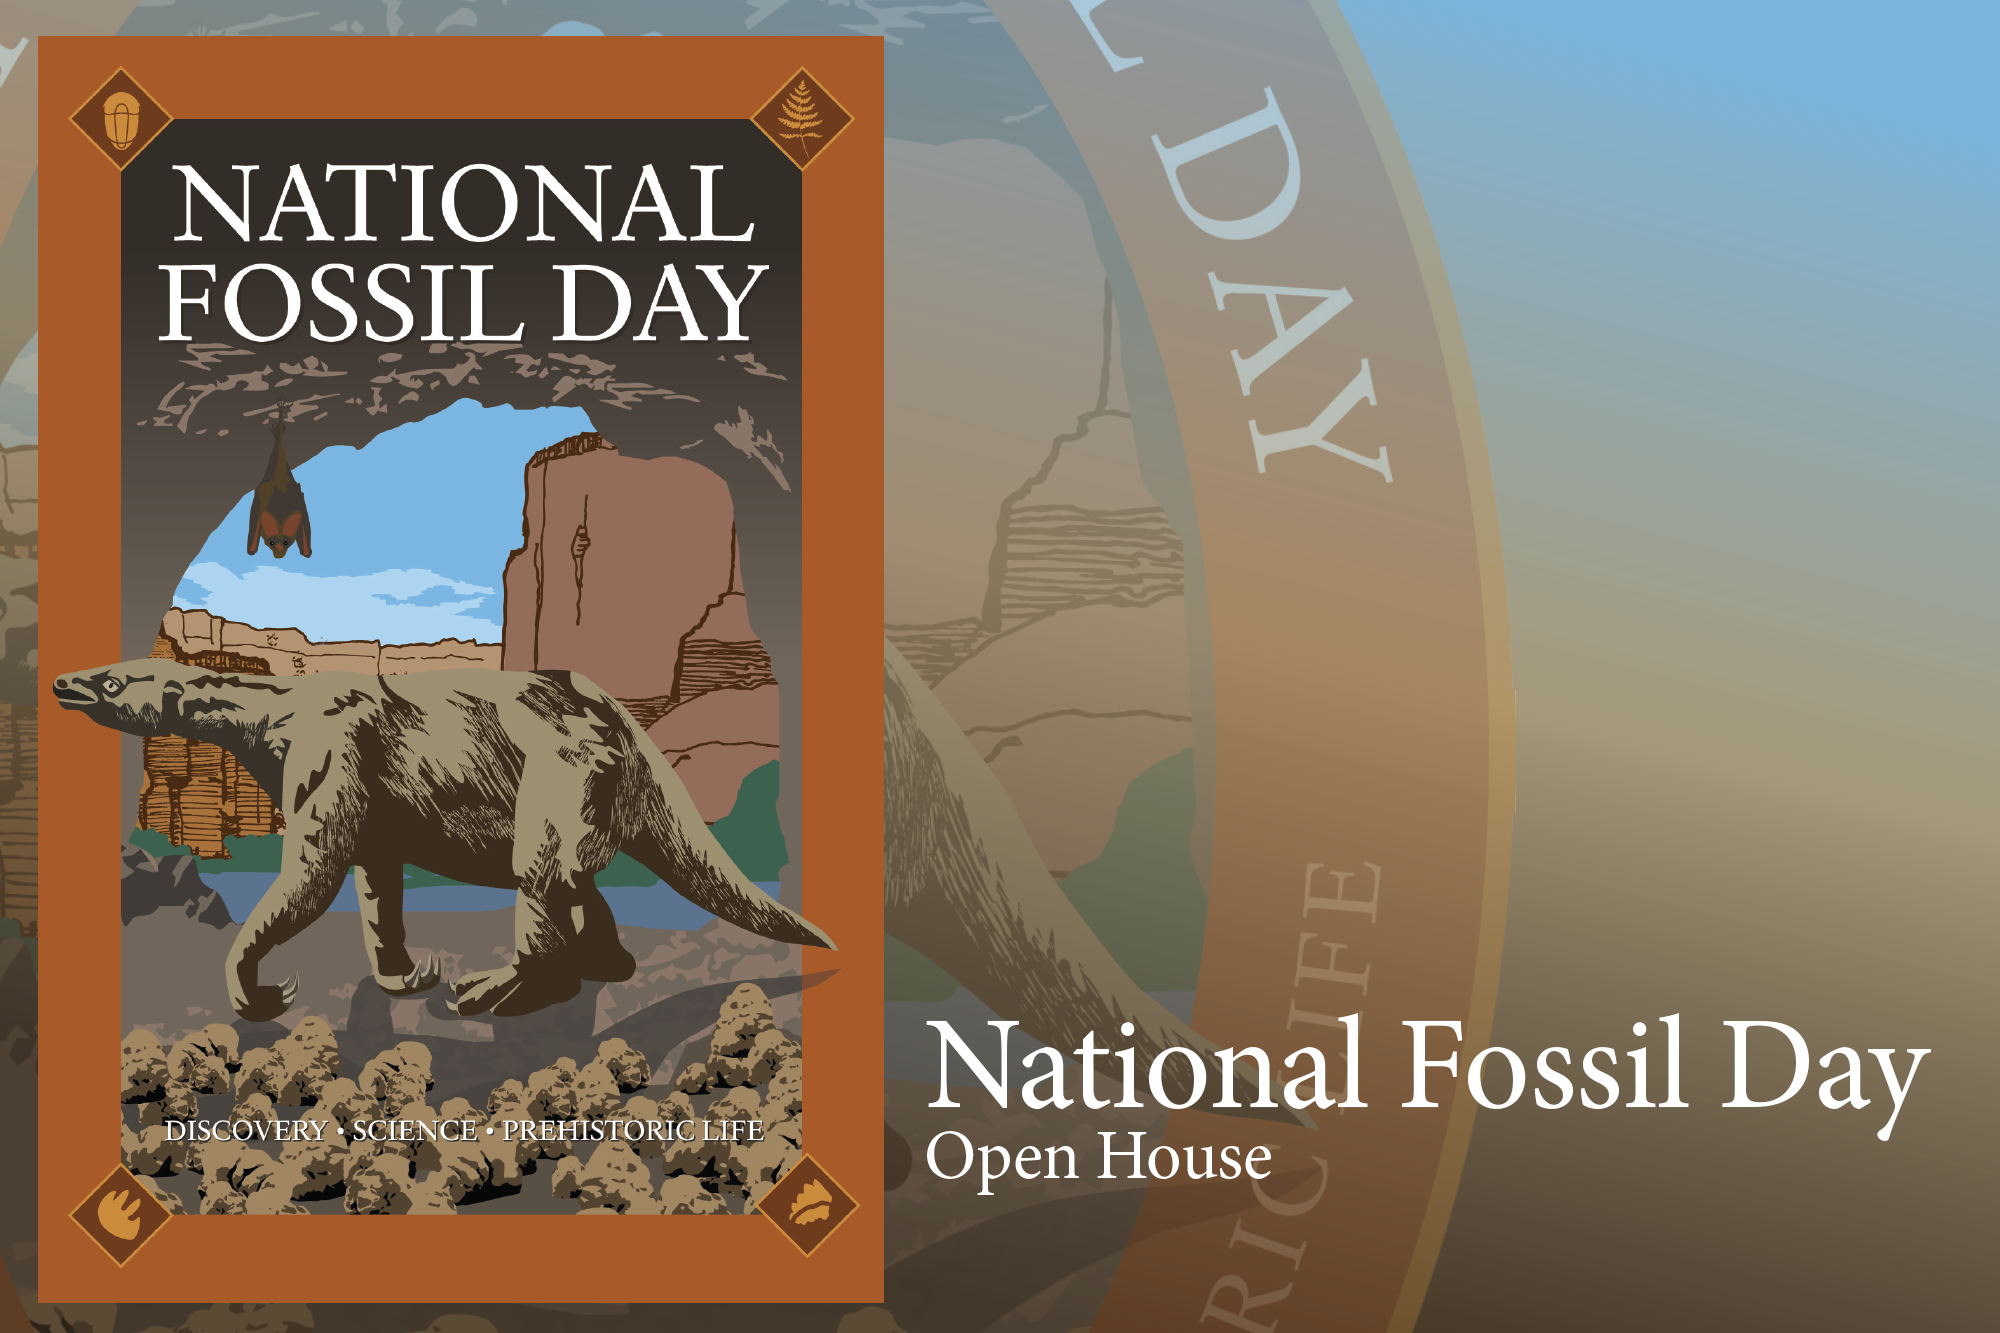 Image of prehistoric sloth with words National Fossil Day Open House